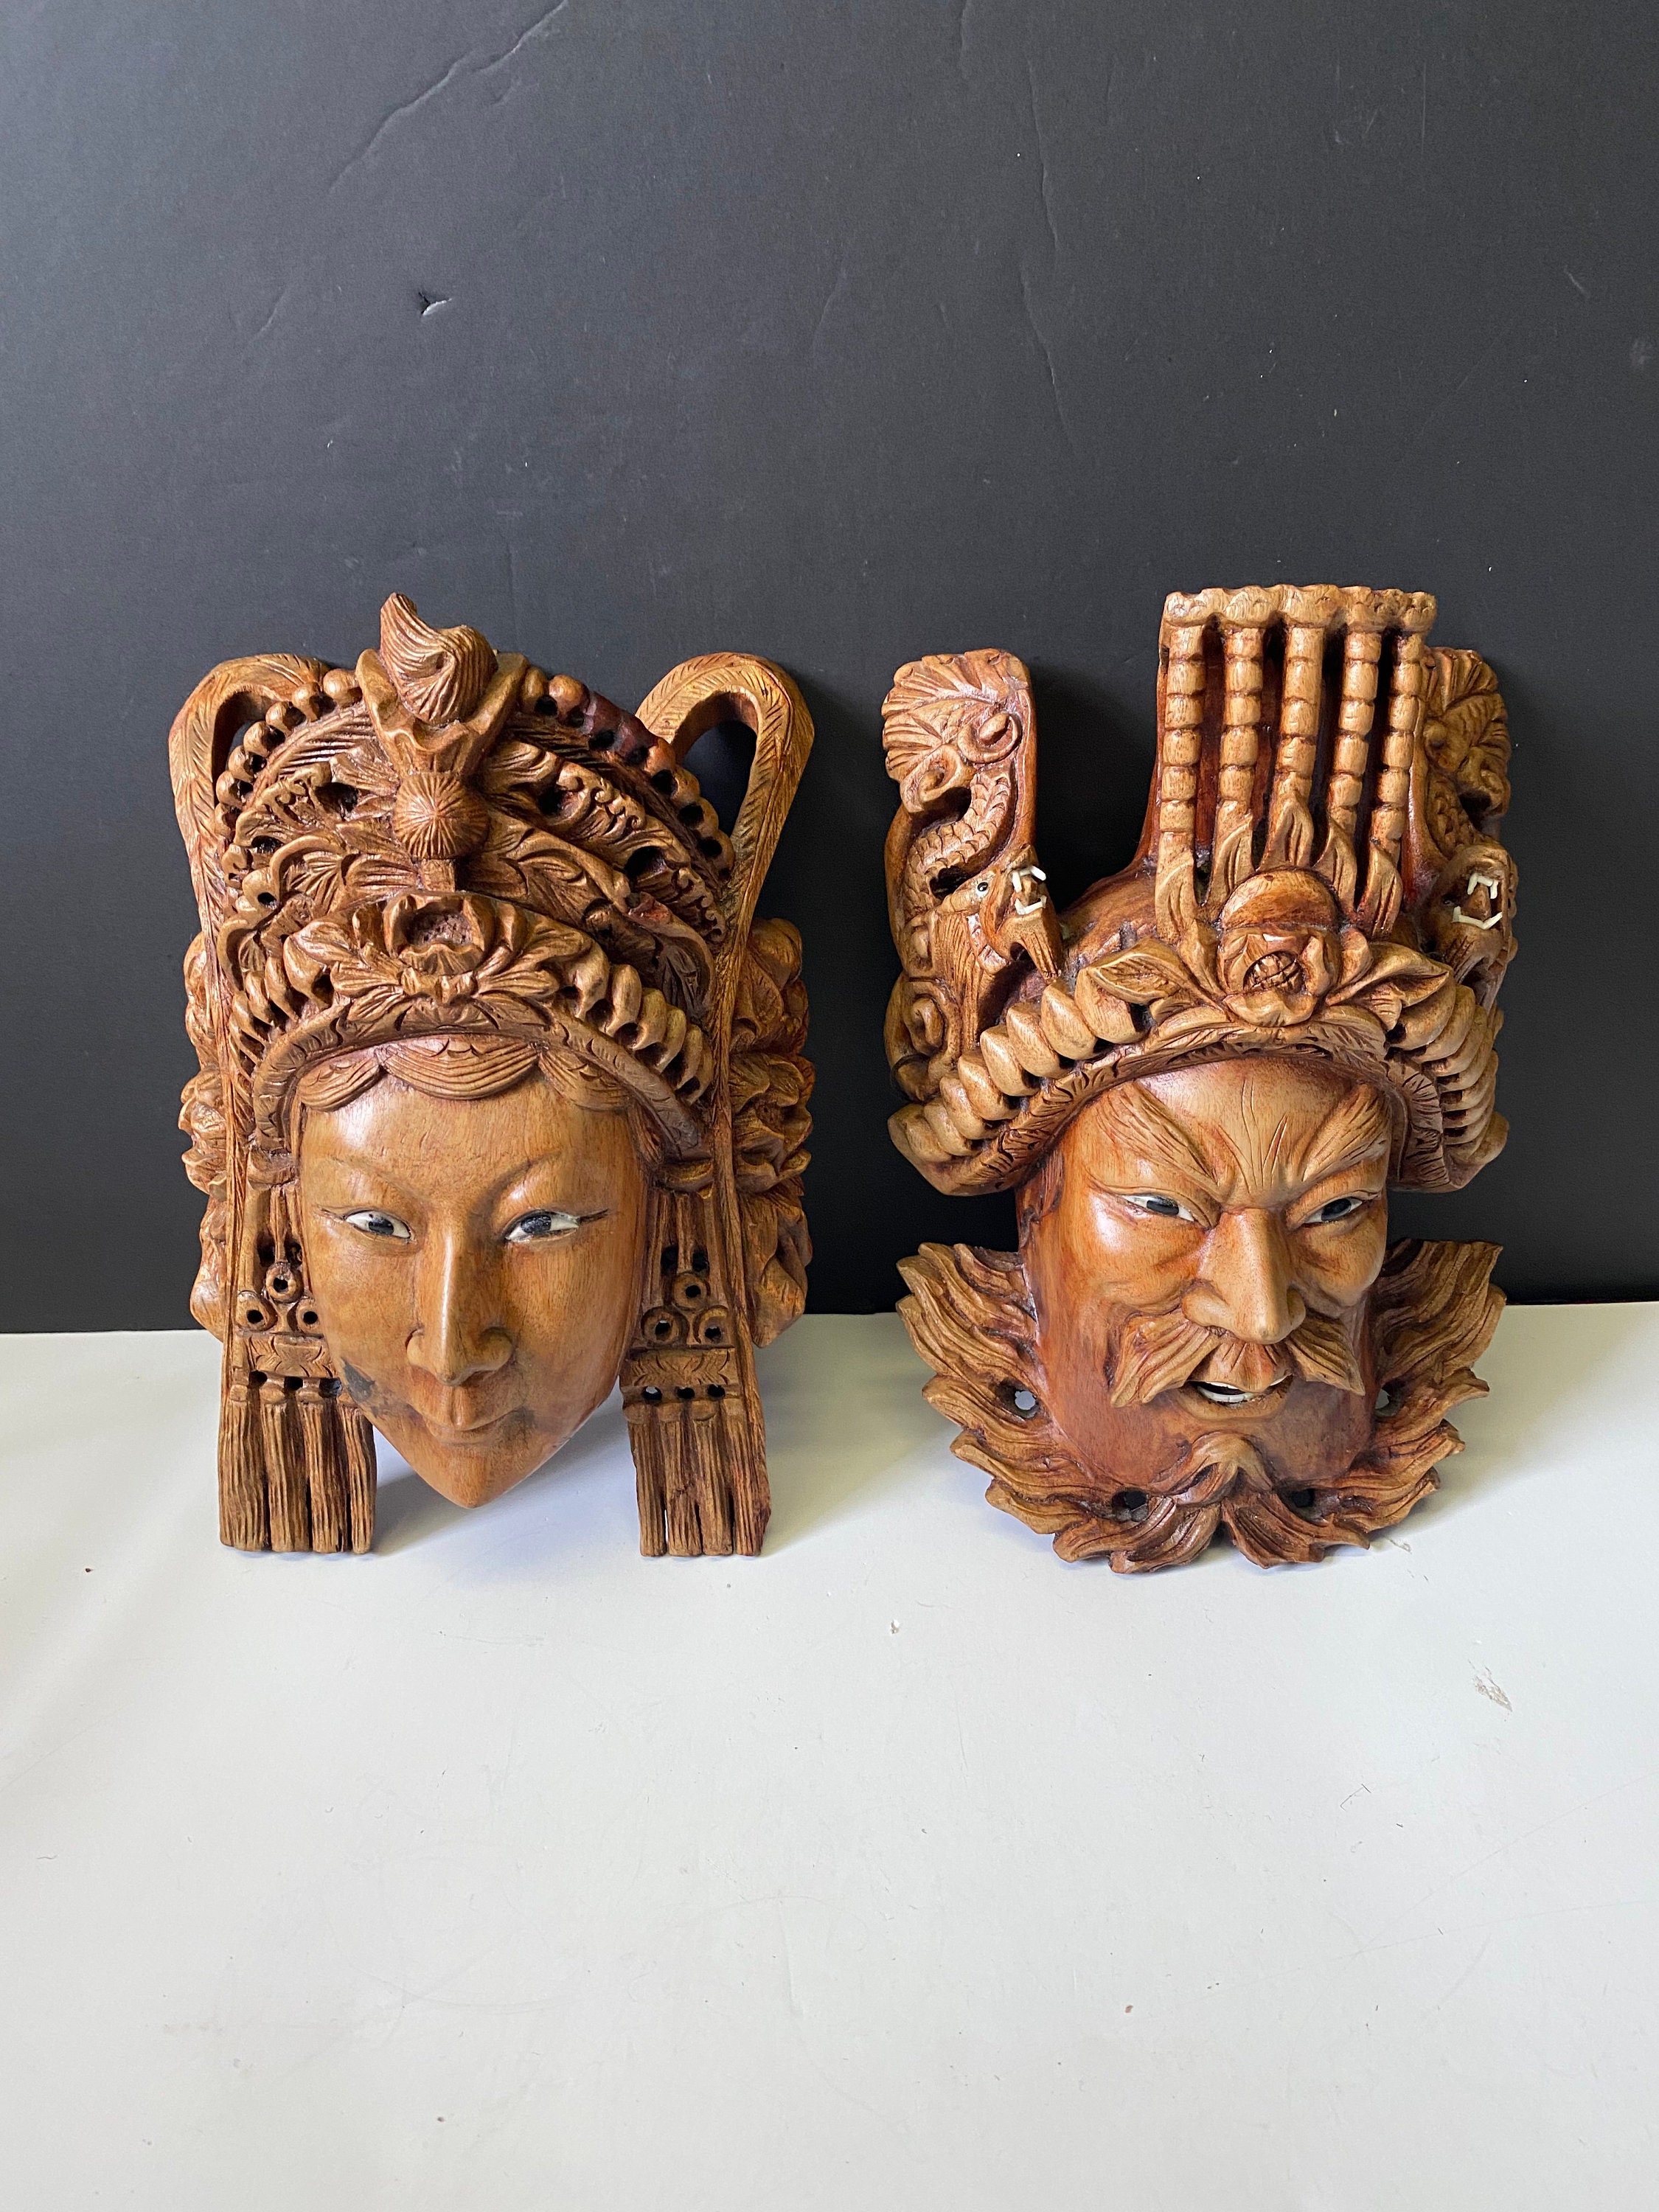 Decor Mask Wood Hand Carved on Metal Stand 15.75 High